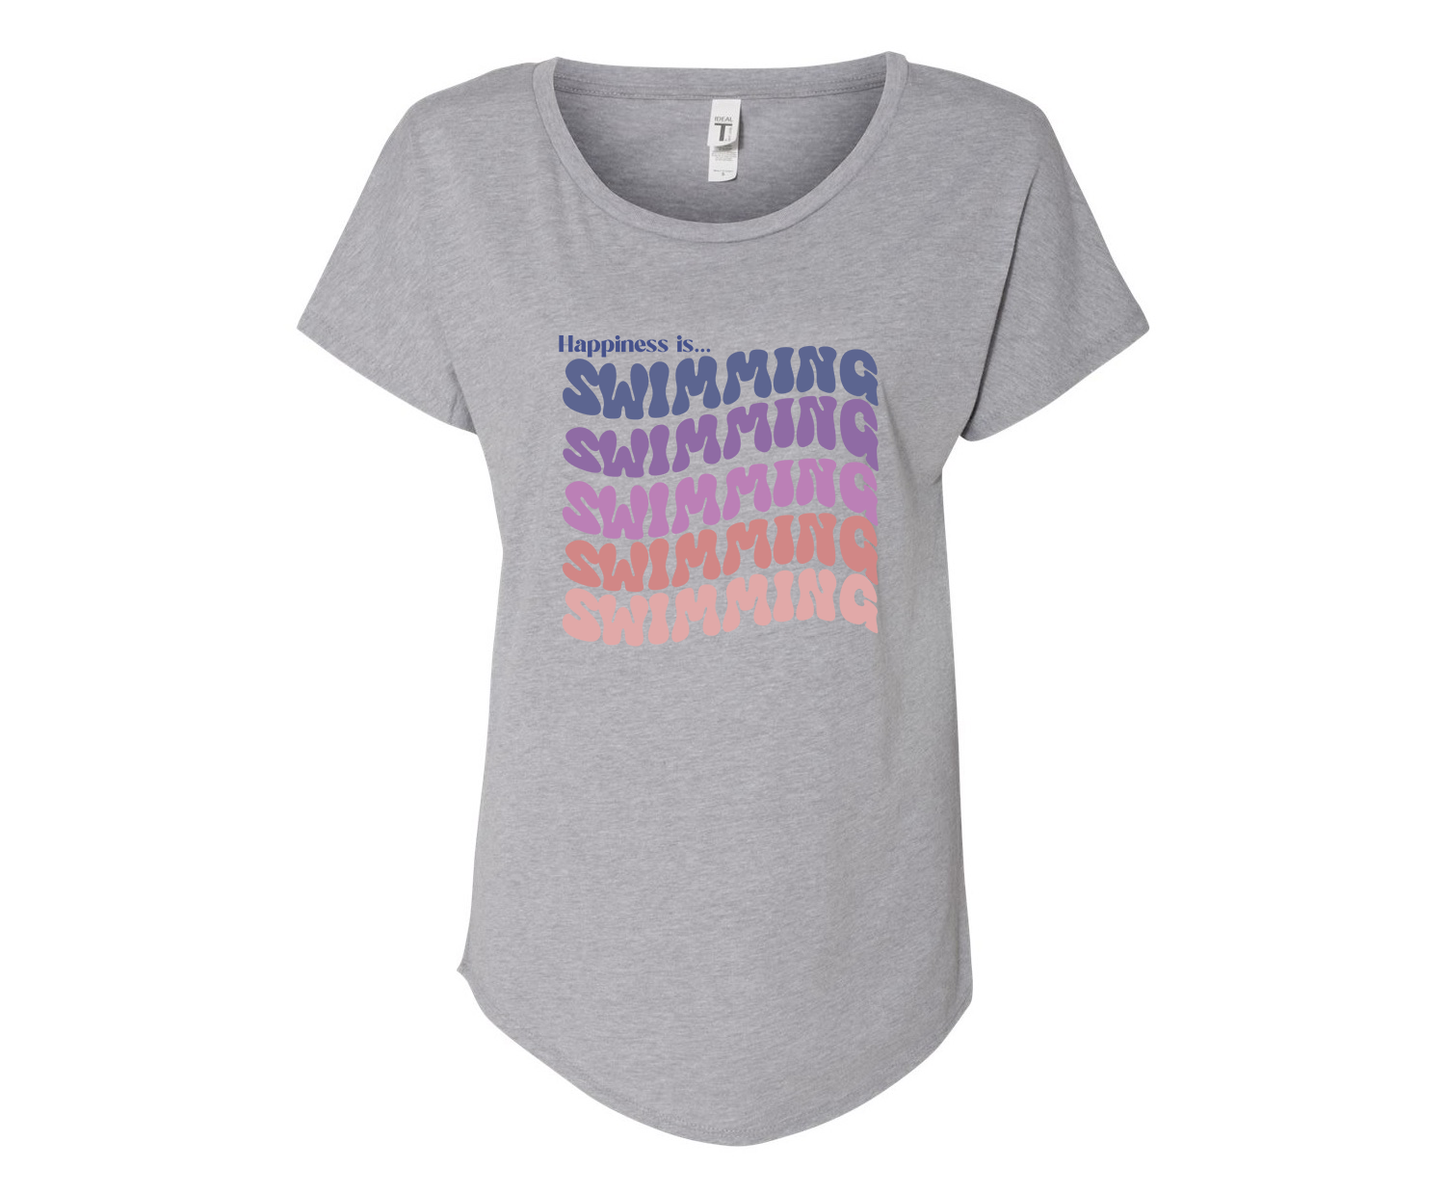 Happiness is Swimming Ladies Tee Shirt - In White & Grey